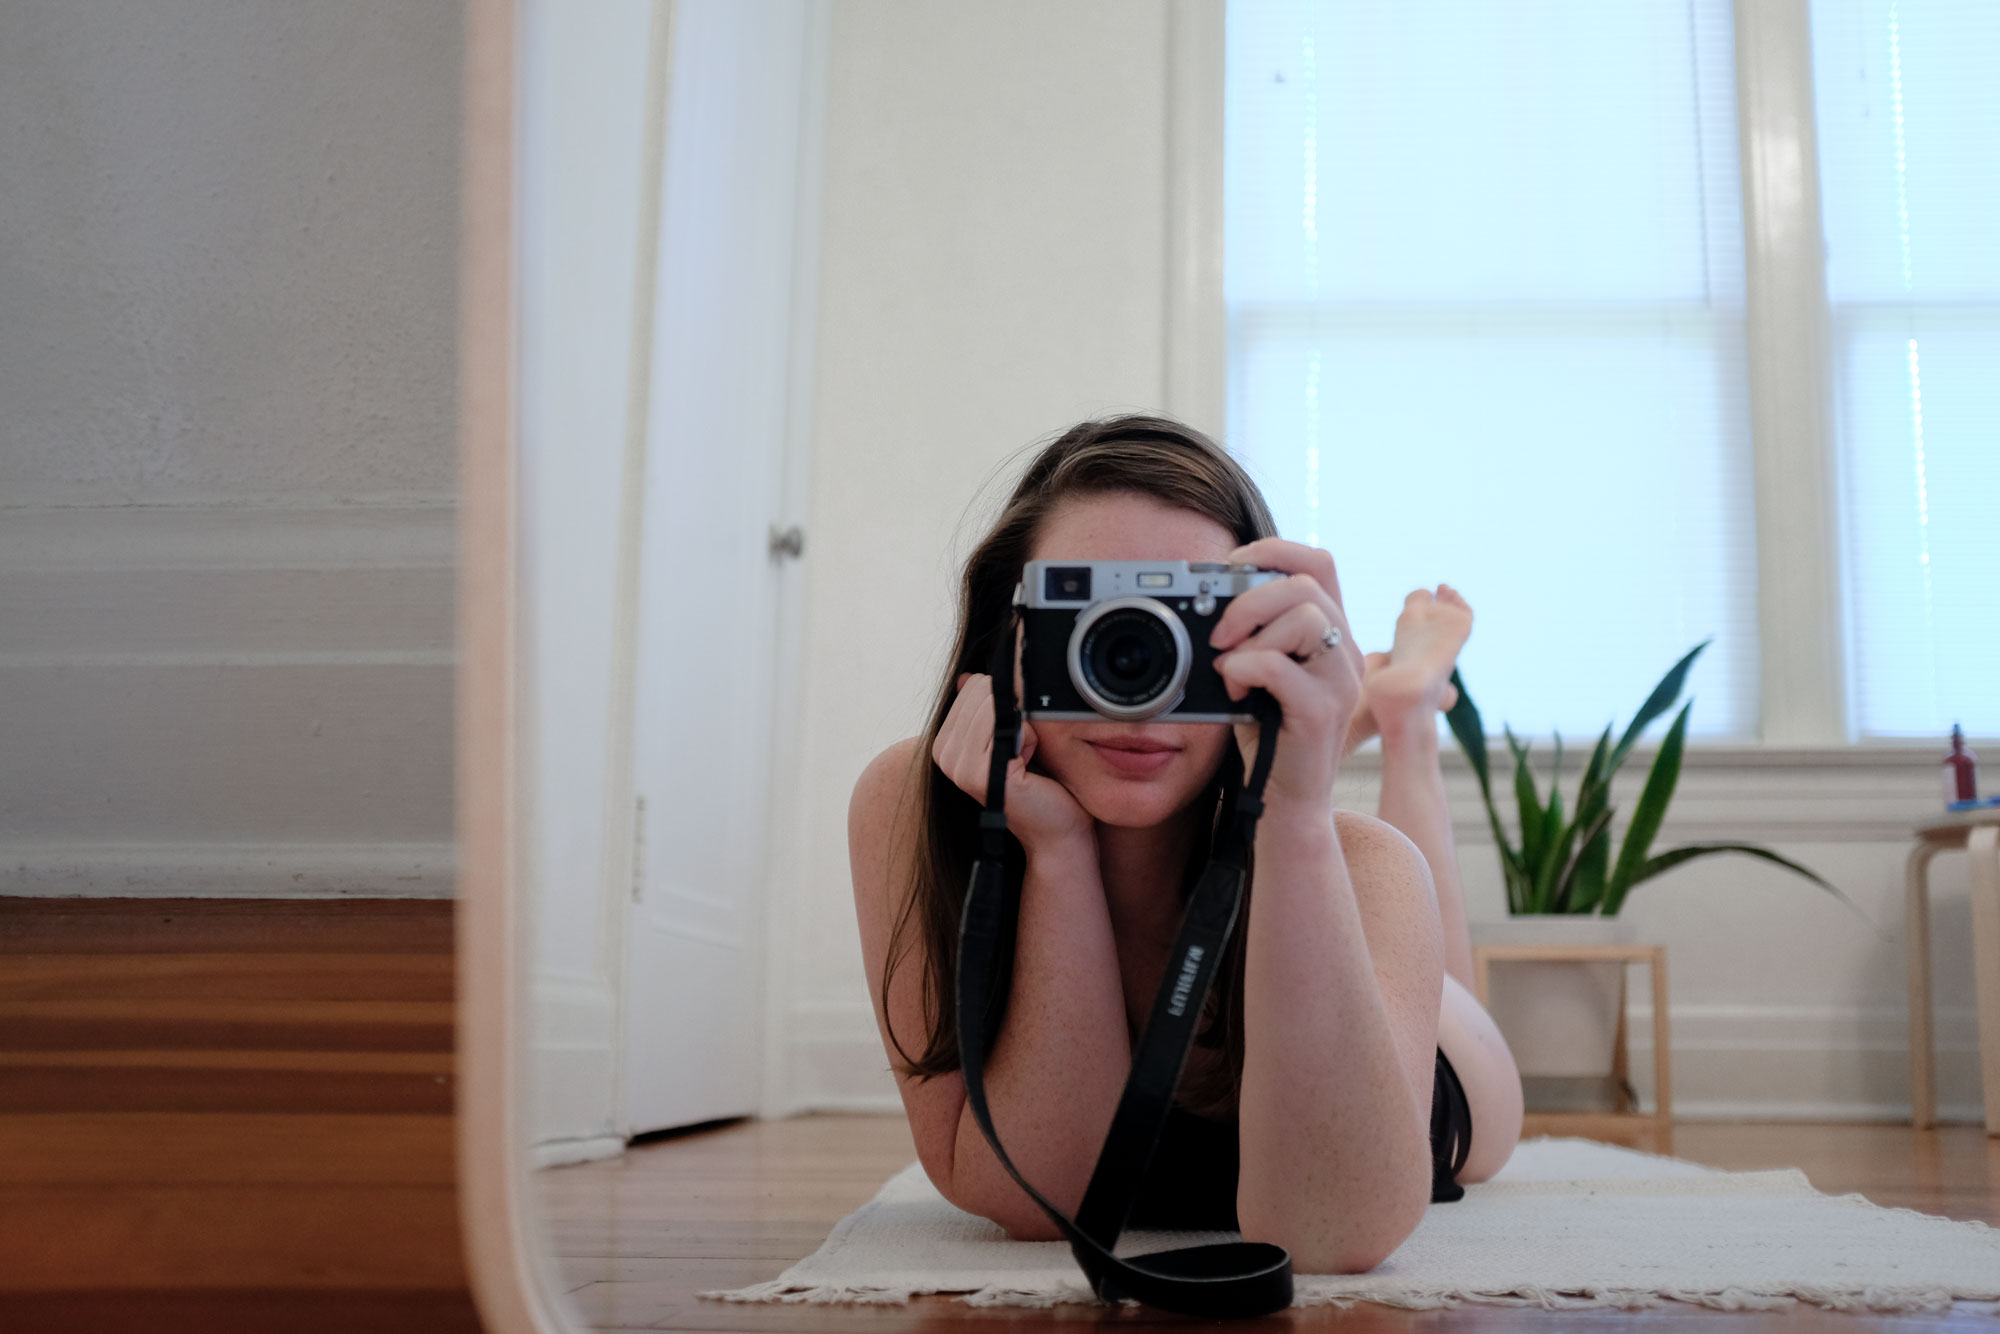 Krystal laying in front of a mirror holding a camera. She is wearing a black tank and underwear